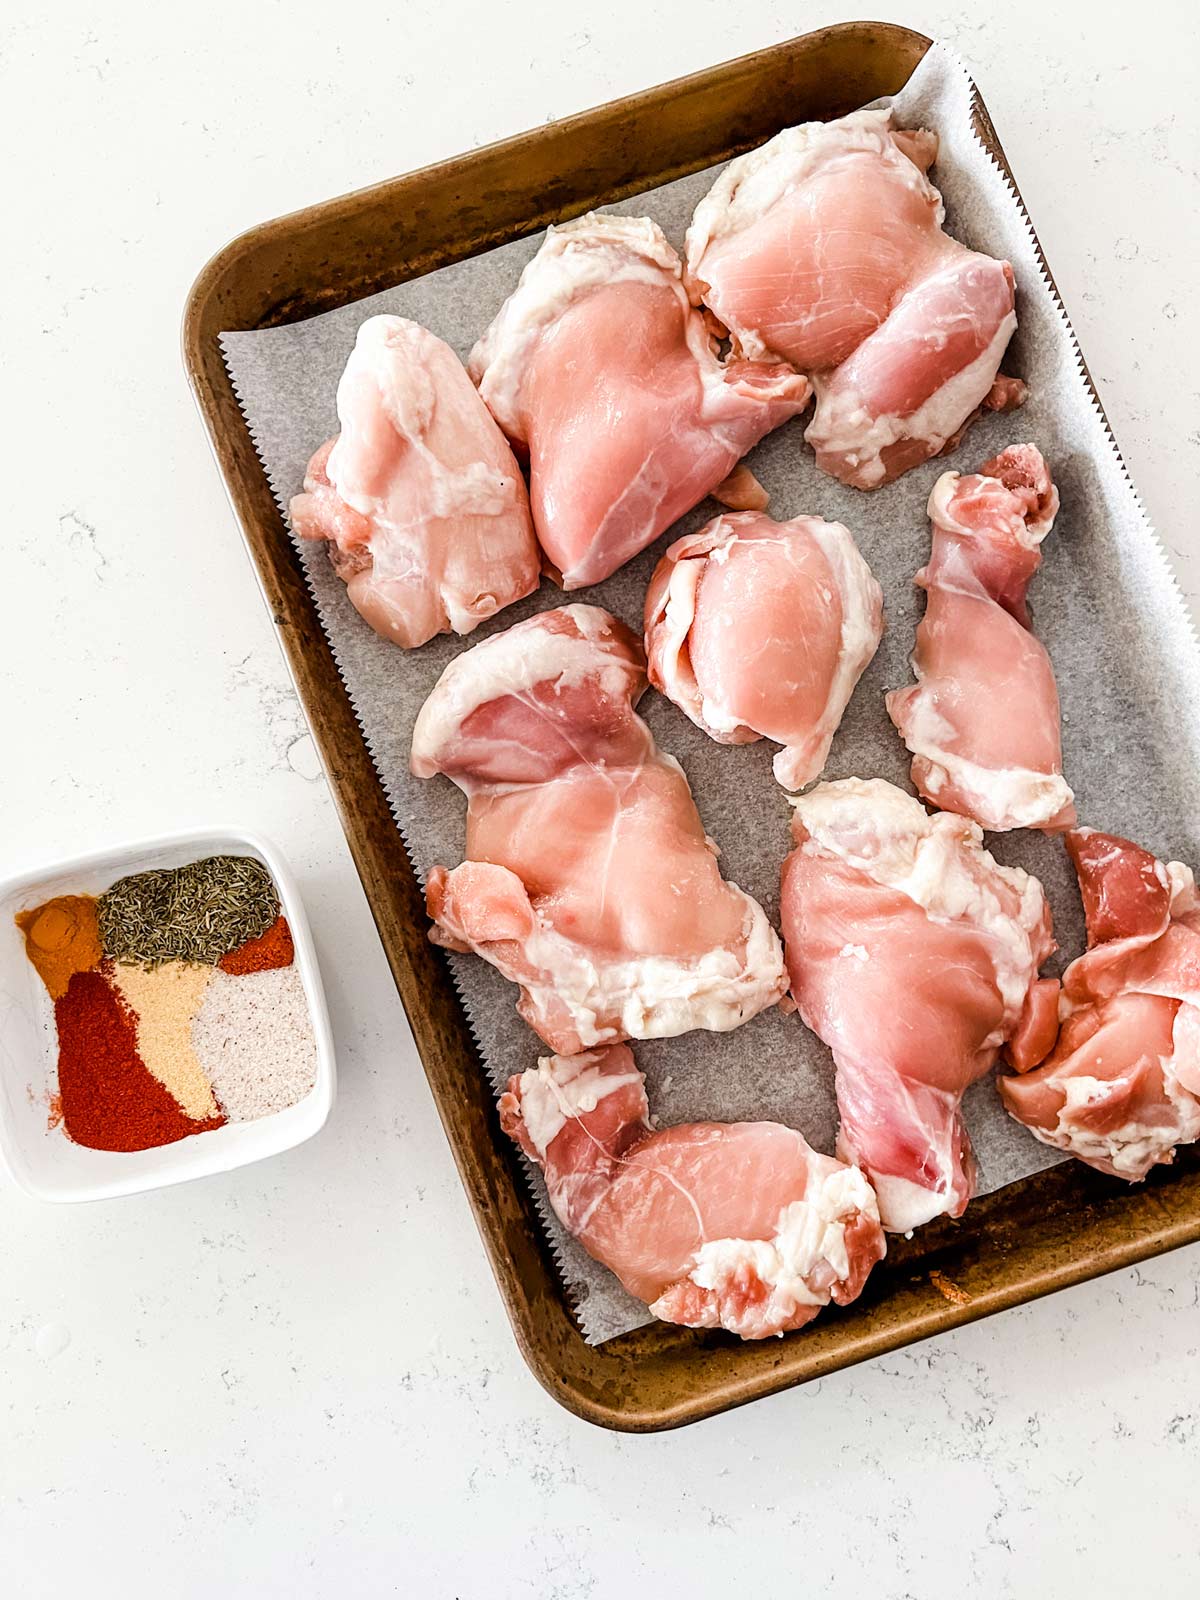 Overhead photo of a parchment lined tray with raw chicken thighs sitting next to a small dish of seasonings.